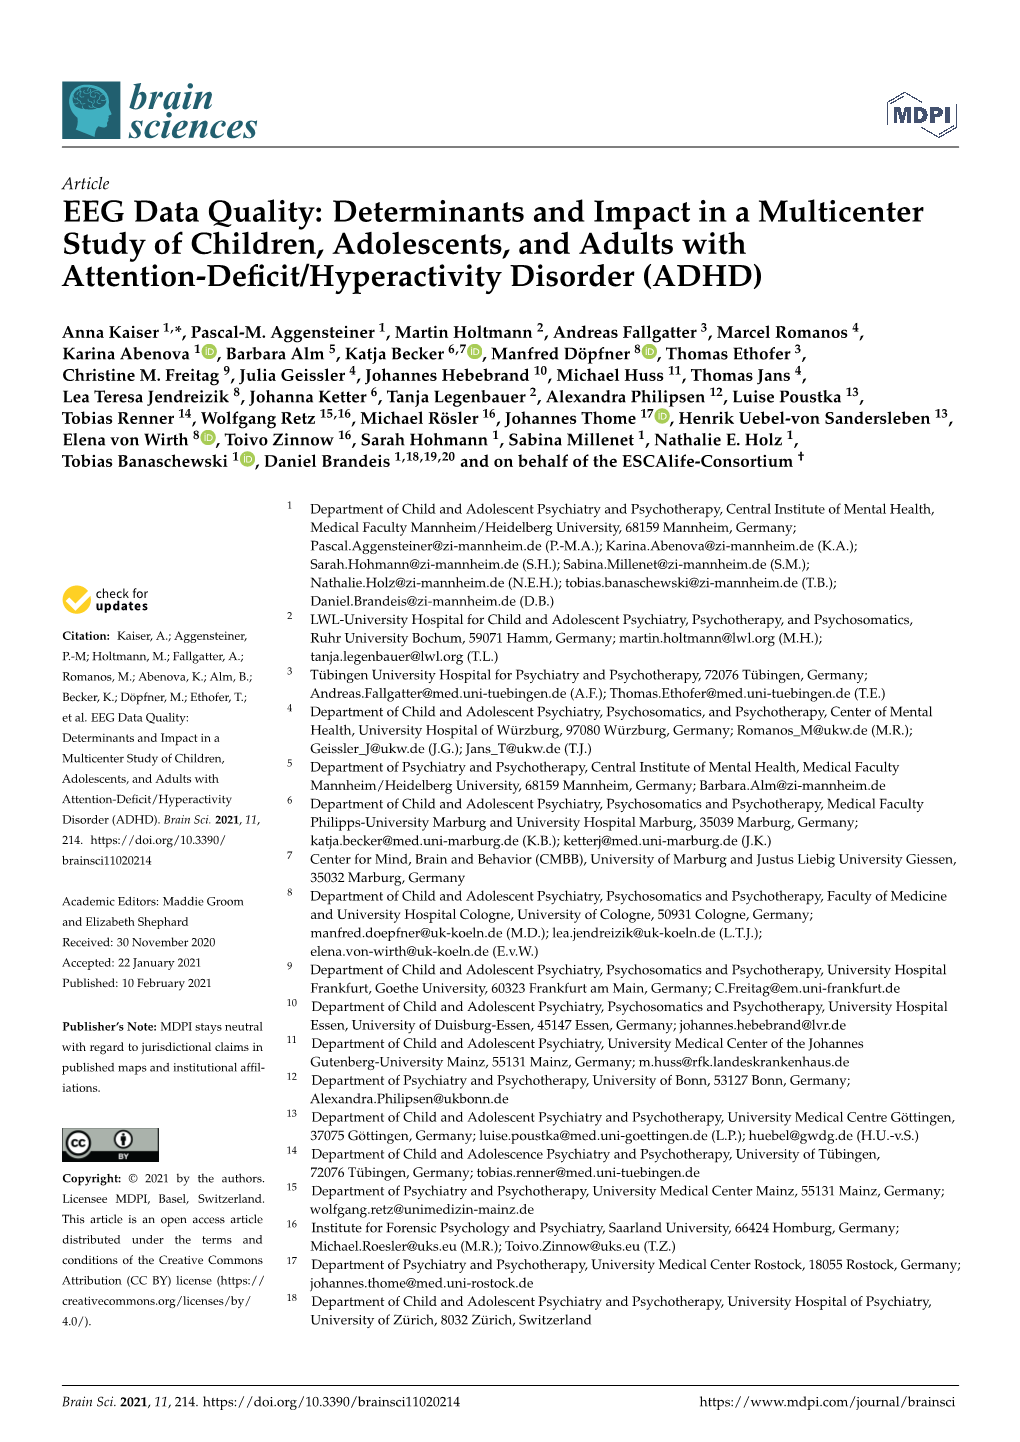 EEG Data Quality: Determinants and Impact in a Multicenter Study of Children, Adolescents, and Adults with Attention-Deﬁcit/Hyperactivity Disorder (ADHD)